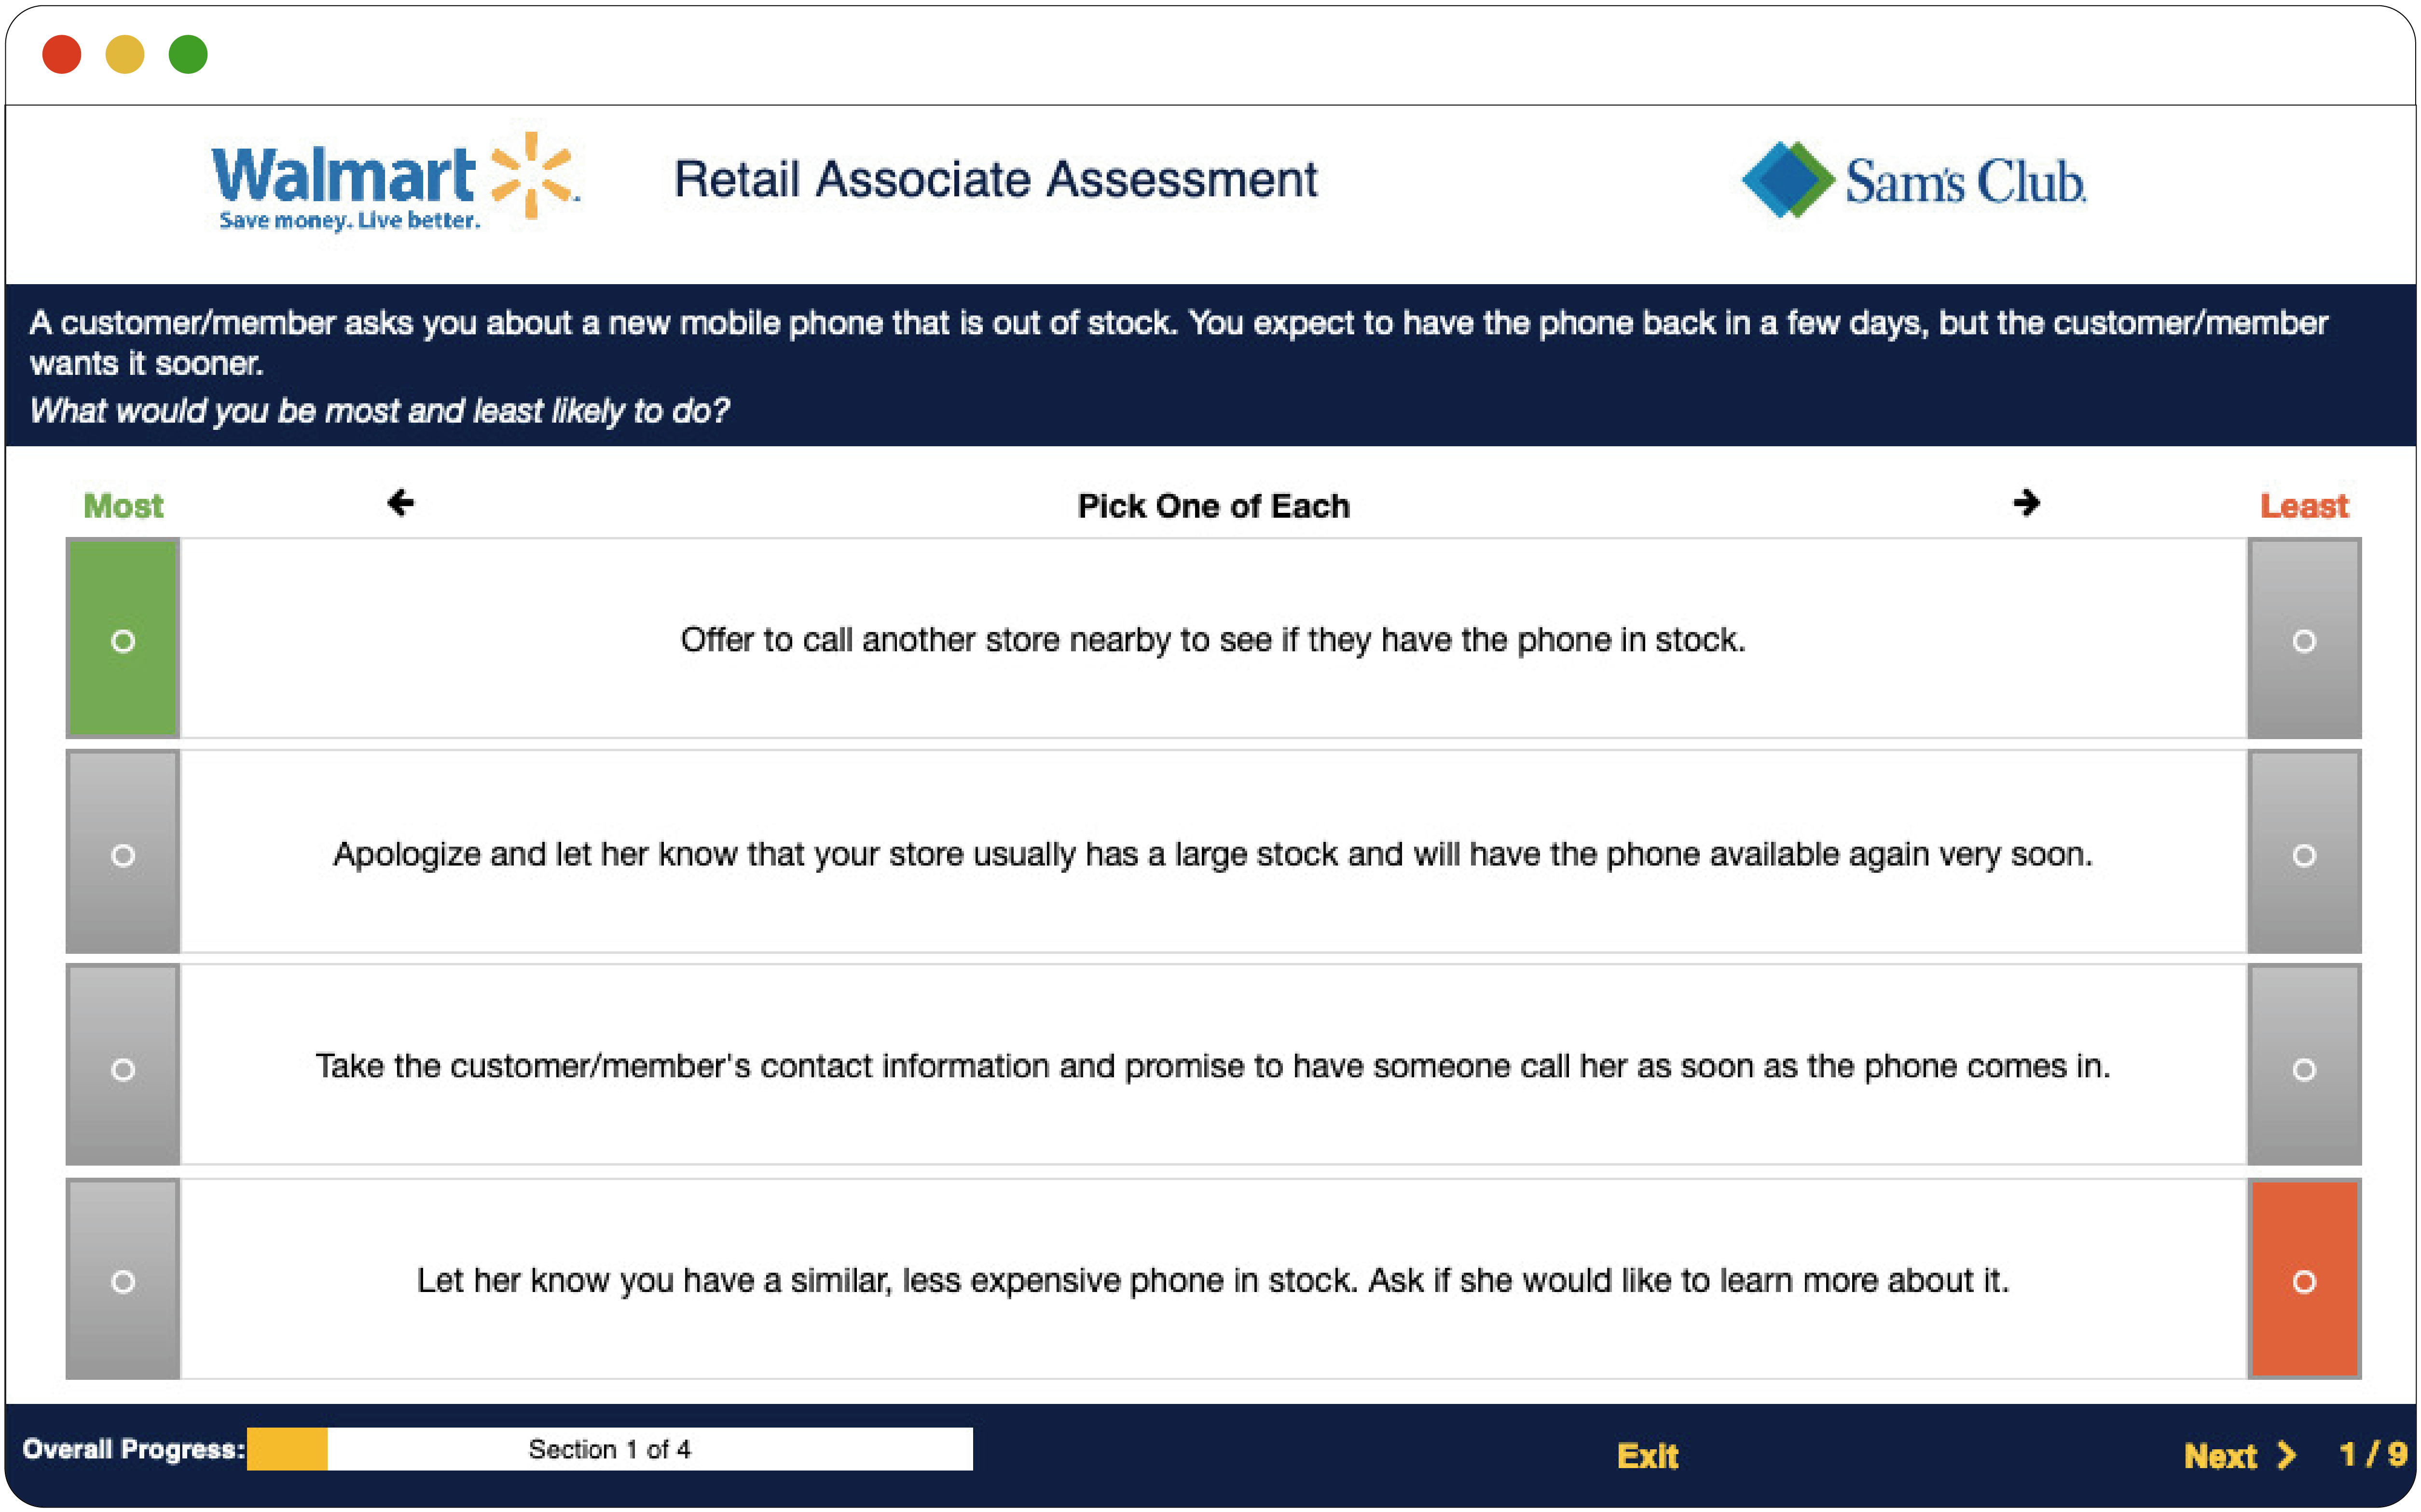 This figure shows a question from Walmart’s situational judgement test. It asks, “A customer/member asks you about a new mobile phone that is out of stock. You expect to have the phone back in a few days, but the customer/member wants it sooner. What would you be most and least likely to do?” There are four options for candidates to select from: 1) Offer to call another store nearby to see if they have the phone in stock; 2) Apologize and let her know that your store usually has a large stock and will have the phone available again very soon; 3) take the customer/member’s contact information and promise to have someone call her as soon as the phone comes in; 4) Let her know that you have a similar, less expensive phone in stock. Ask if she would like to learn more about it.